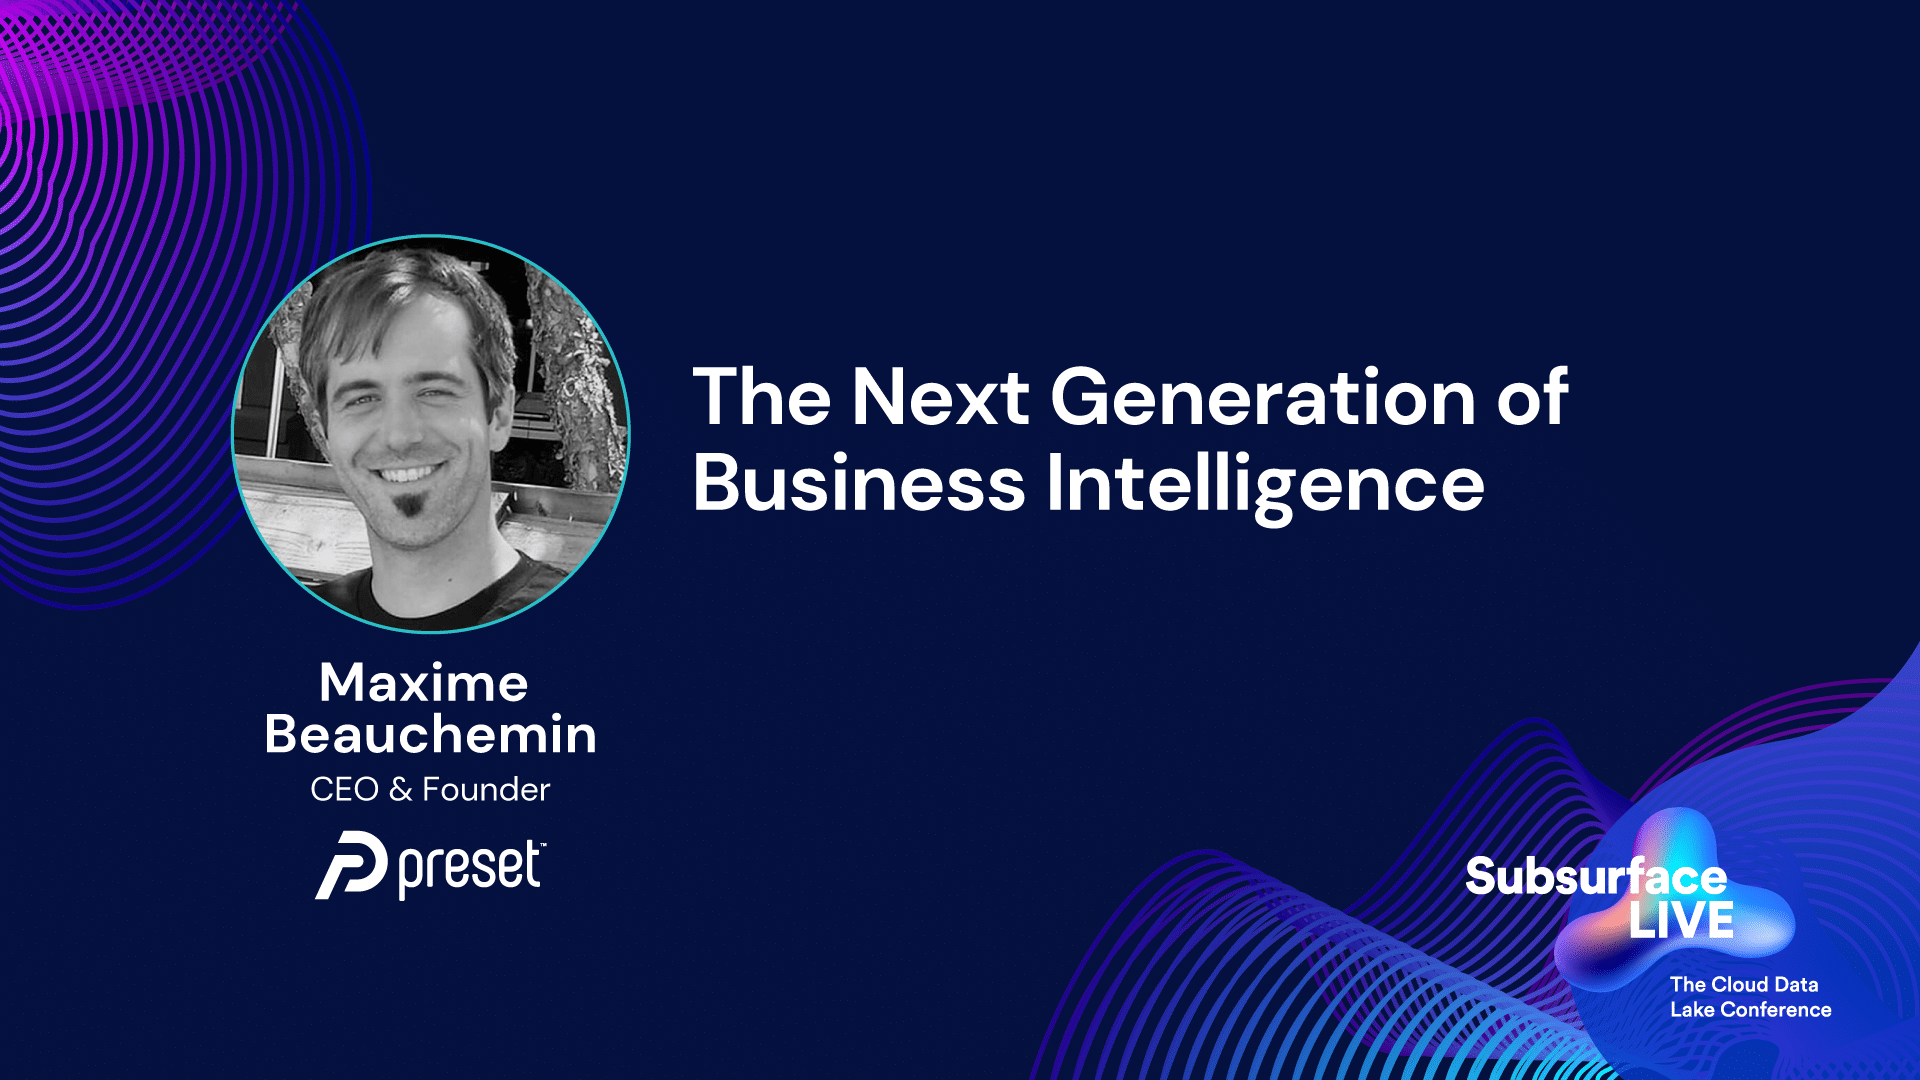 The Next Generation of Business Intelligence